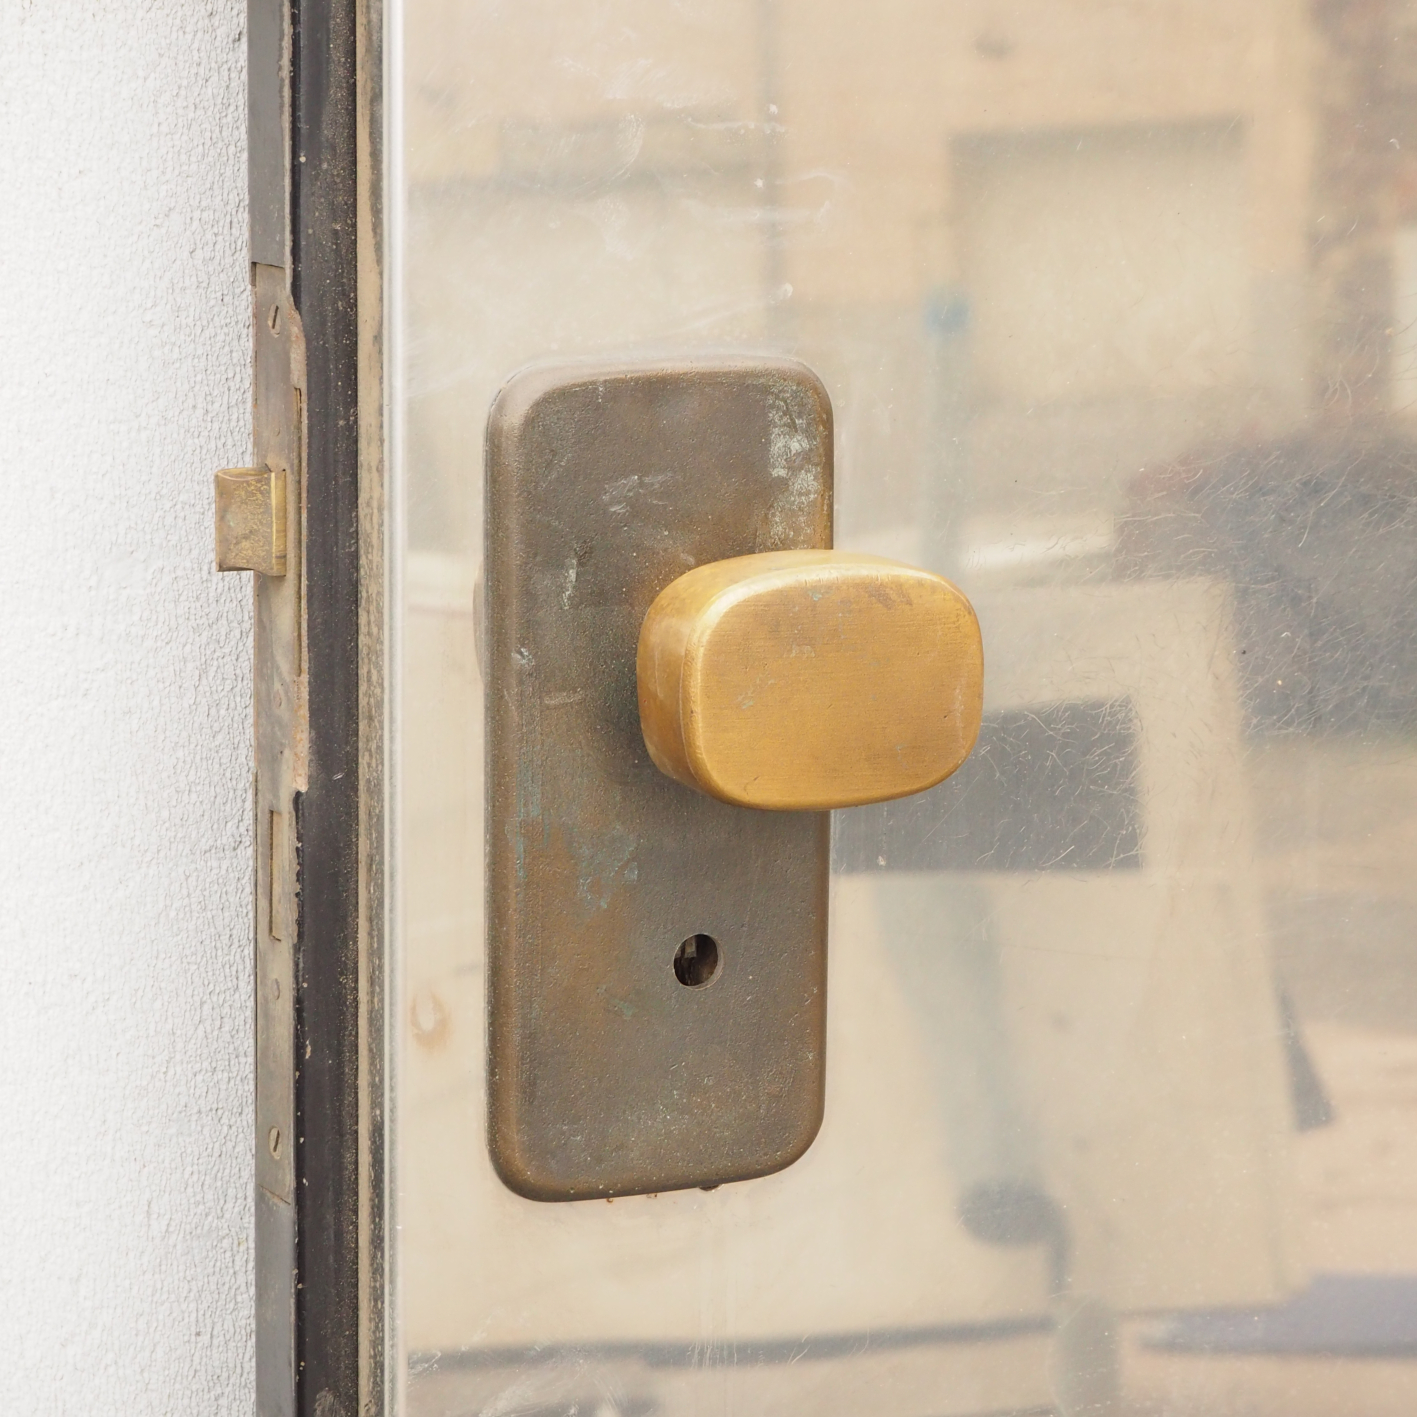 Door in stainless steel with bronze locket by Jules Wabbes (H. 199 x 69 cm) - Right